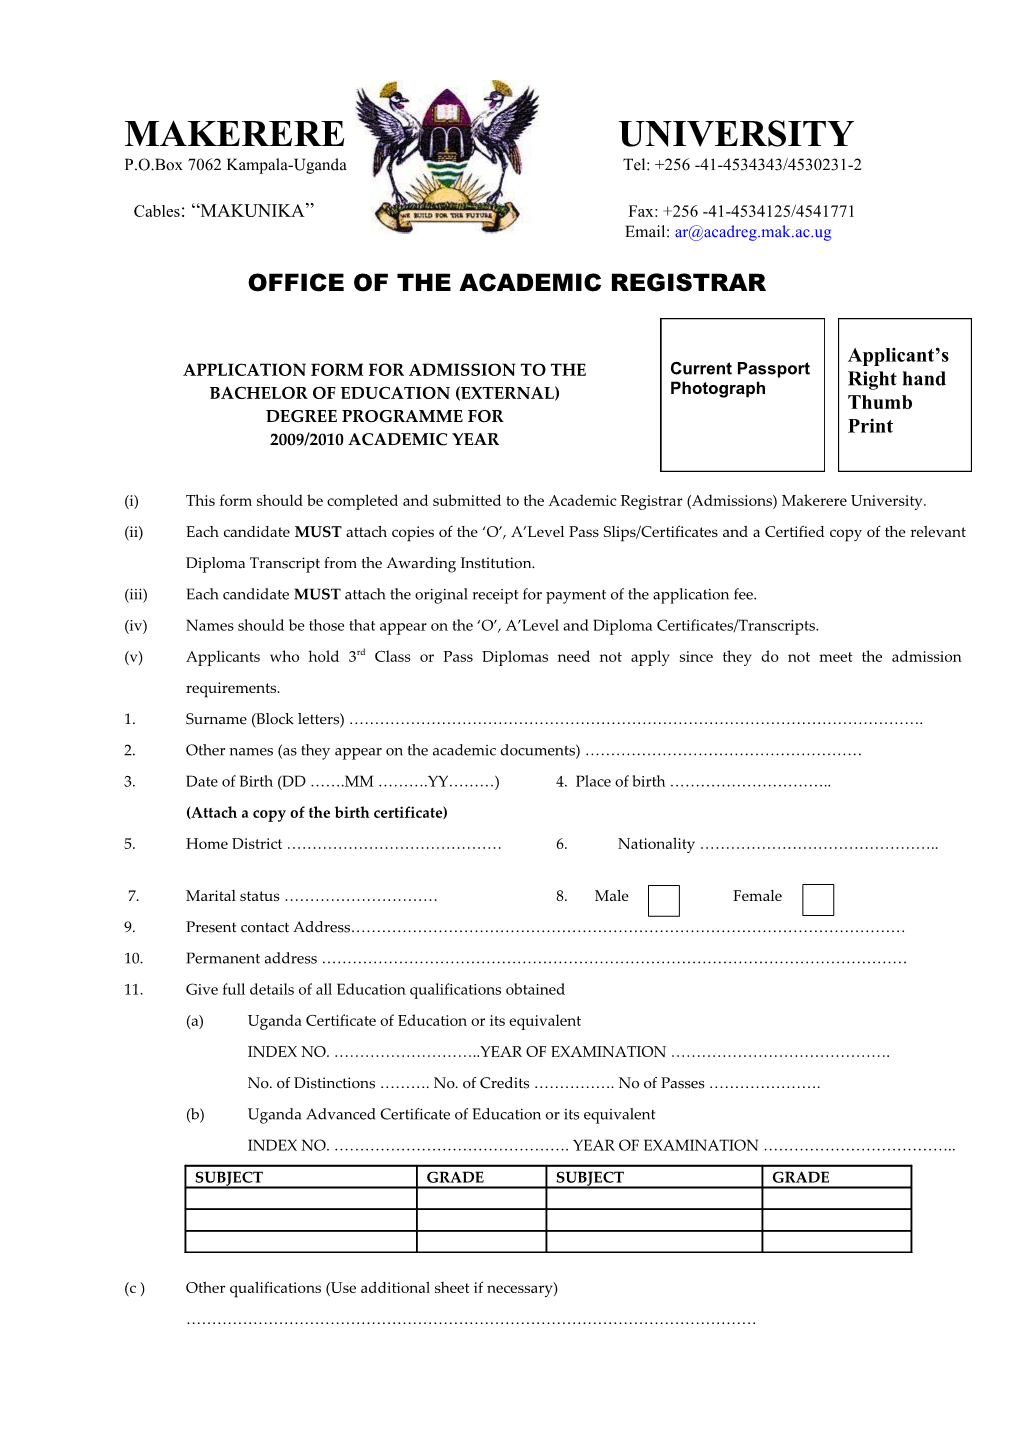 Application Form for Admission to The